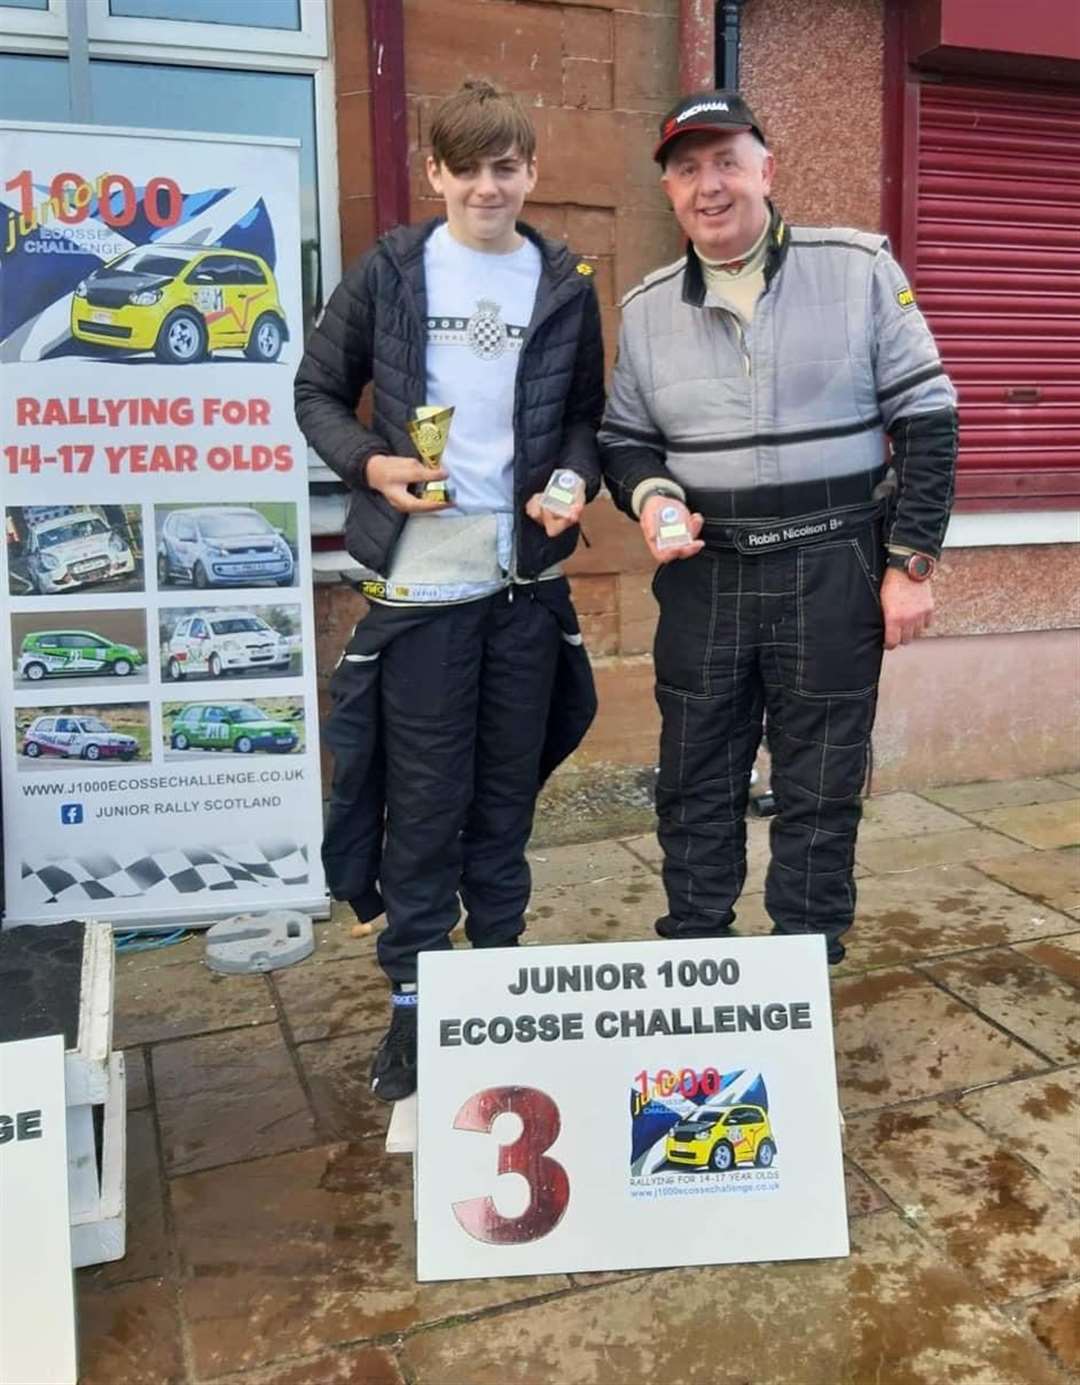 Jack Ryan and navigator Robin Nicolson after finishing third overall in the latest Junior 1000 Ecosse Challenge event.